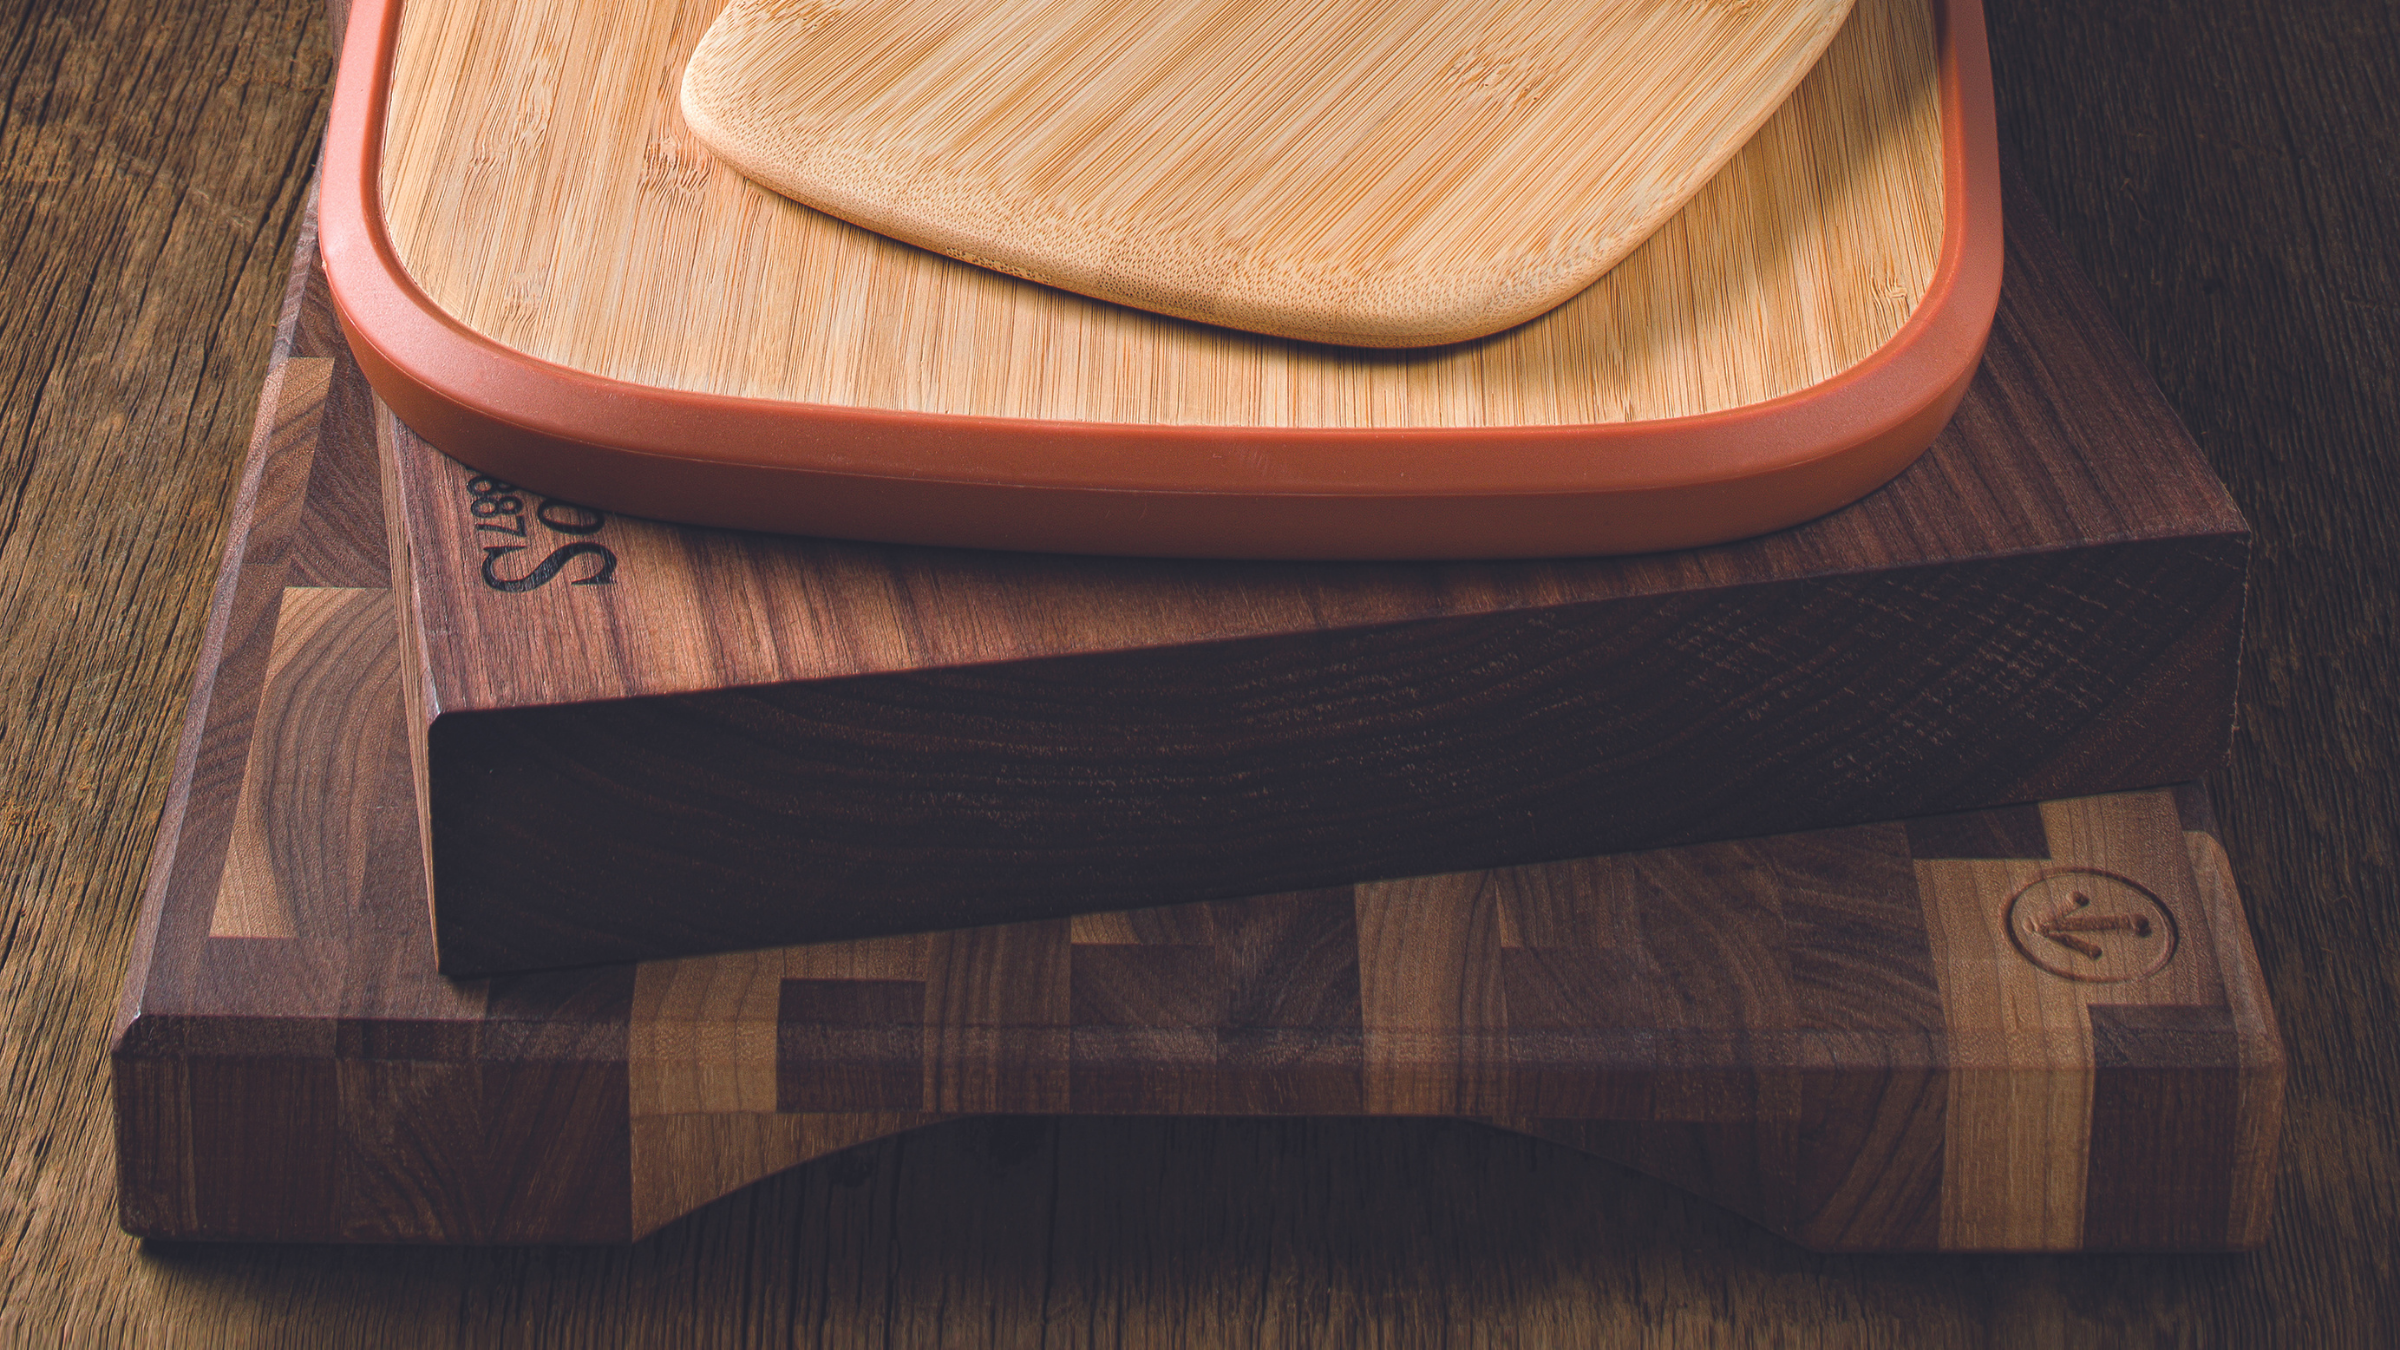 Our Guide to How to Clean a Cutting Board: Wood, Bamboo and Plastic